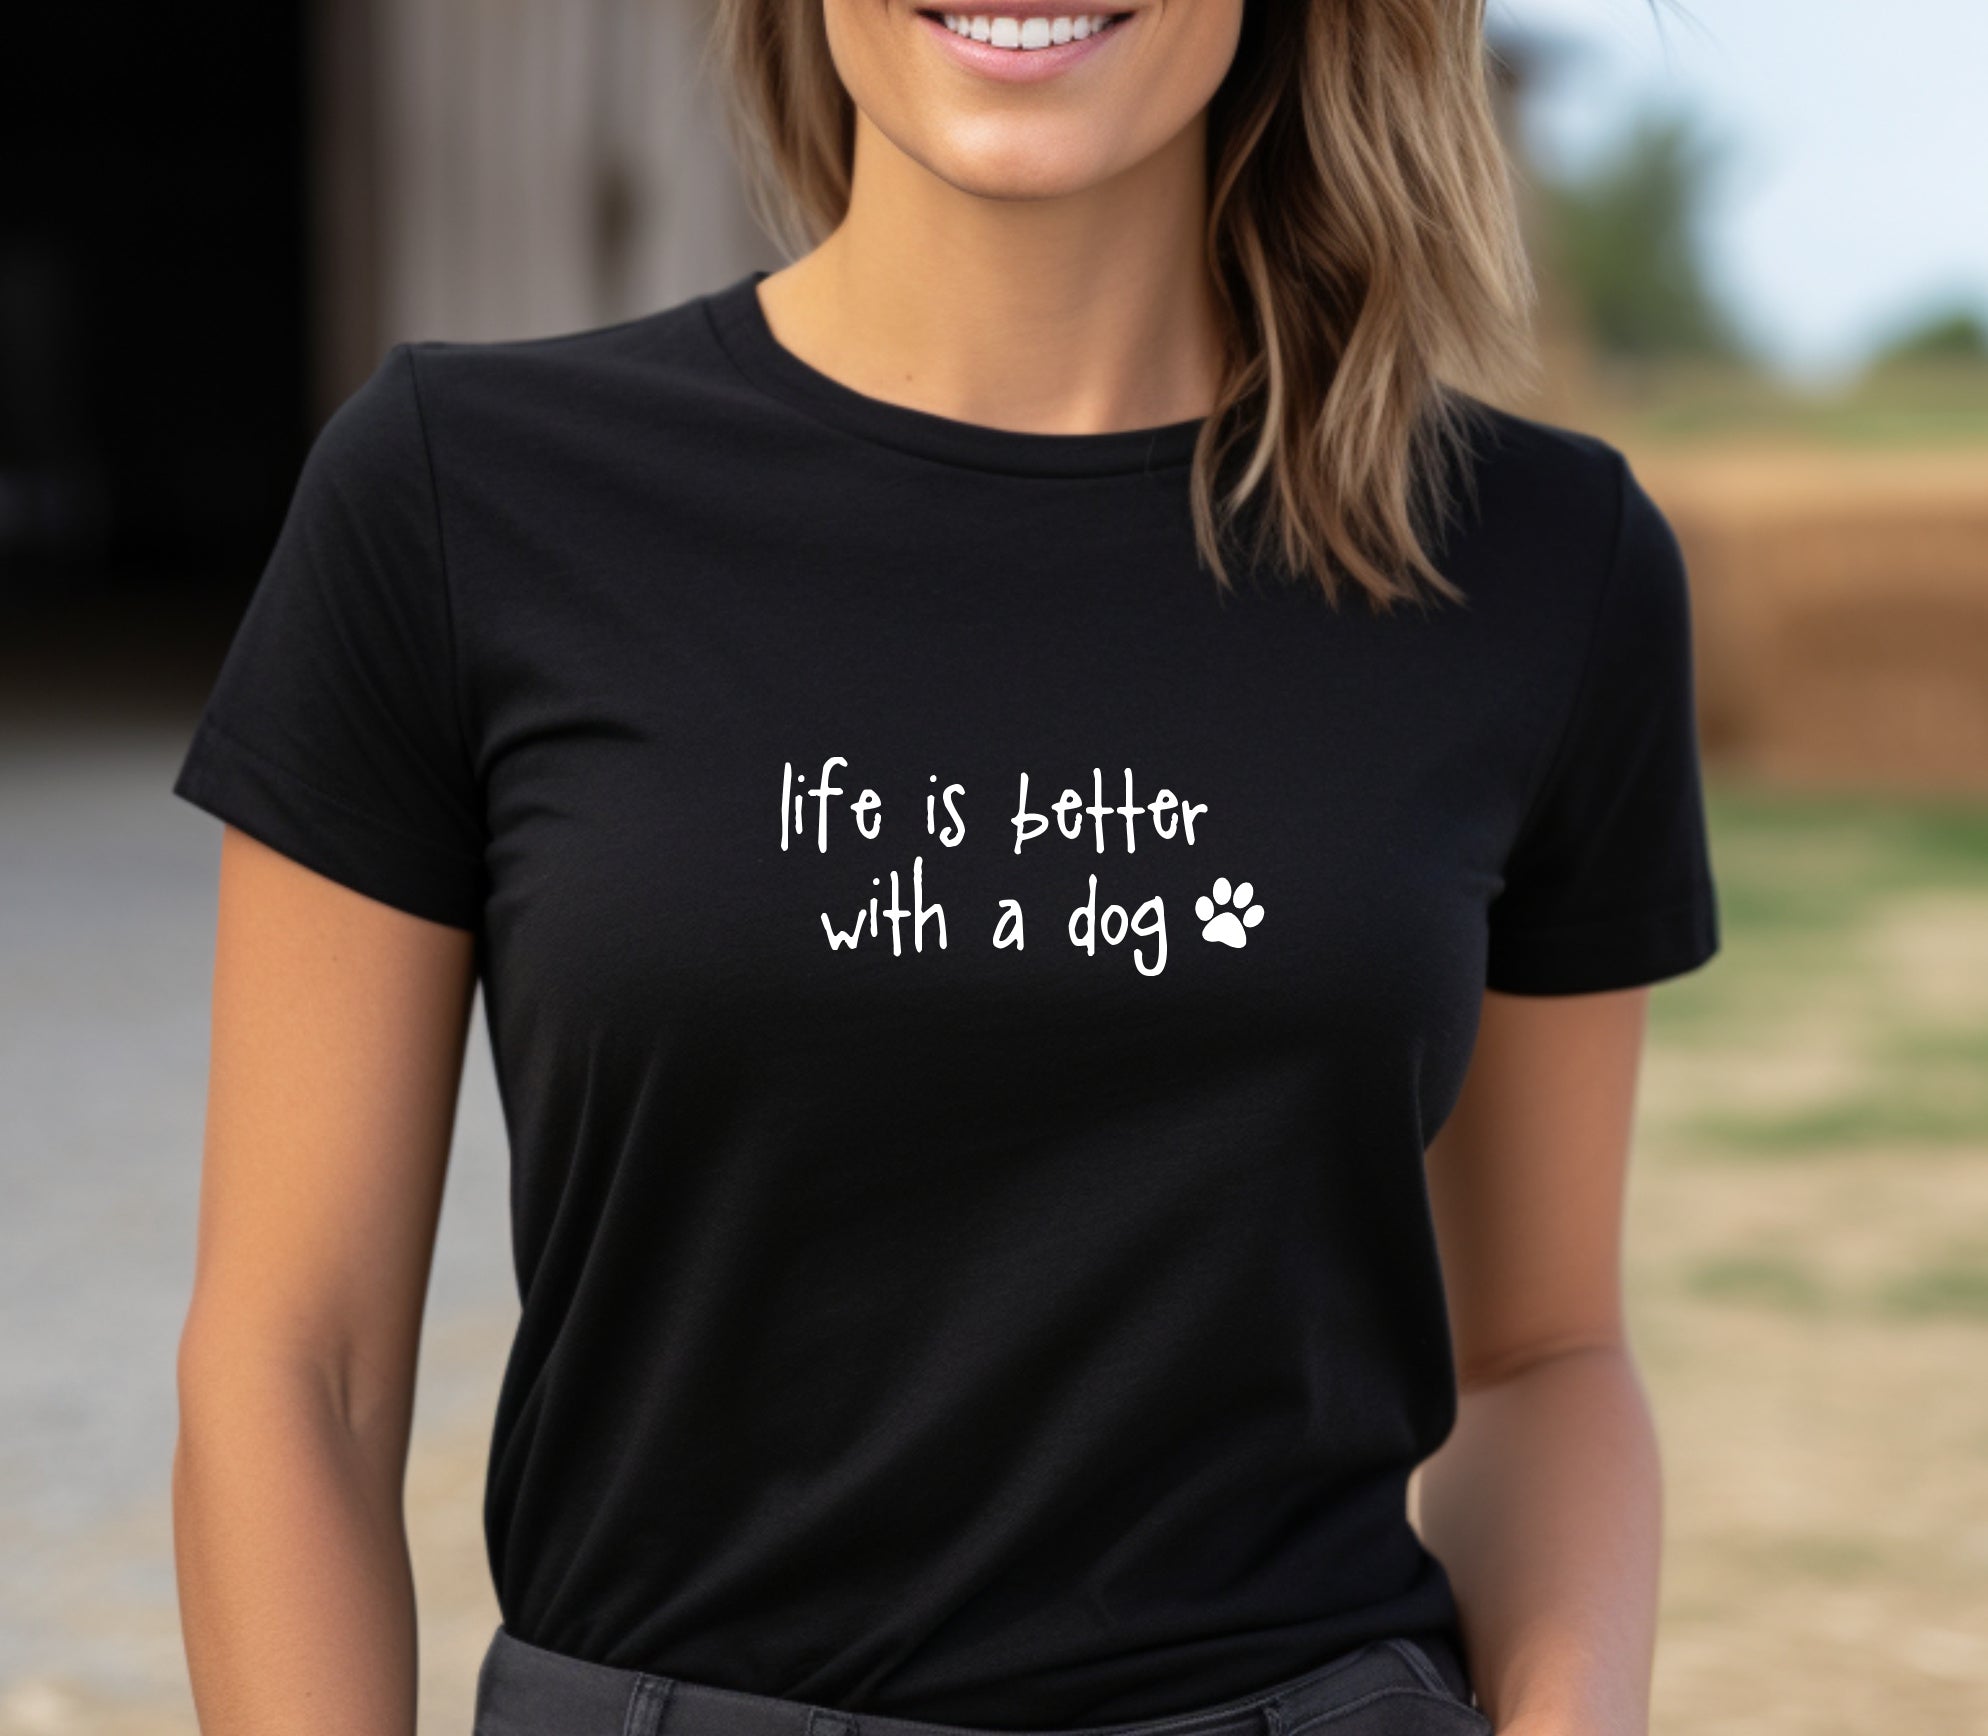 life is better with a dog black t shirt